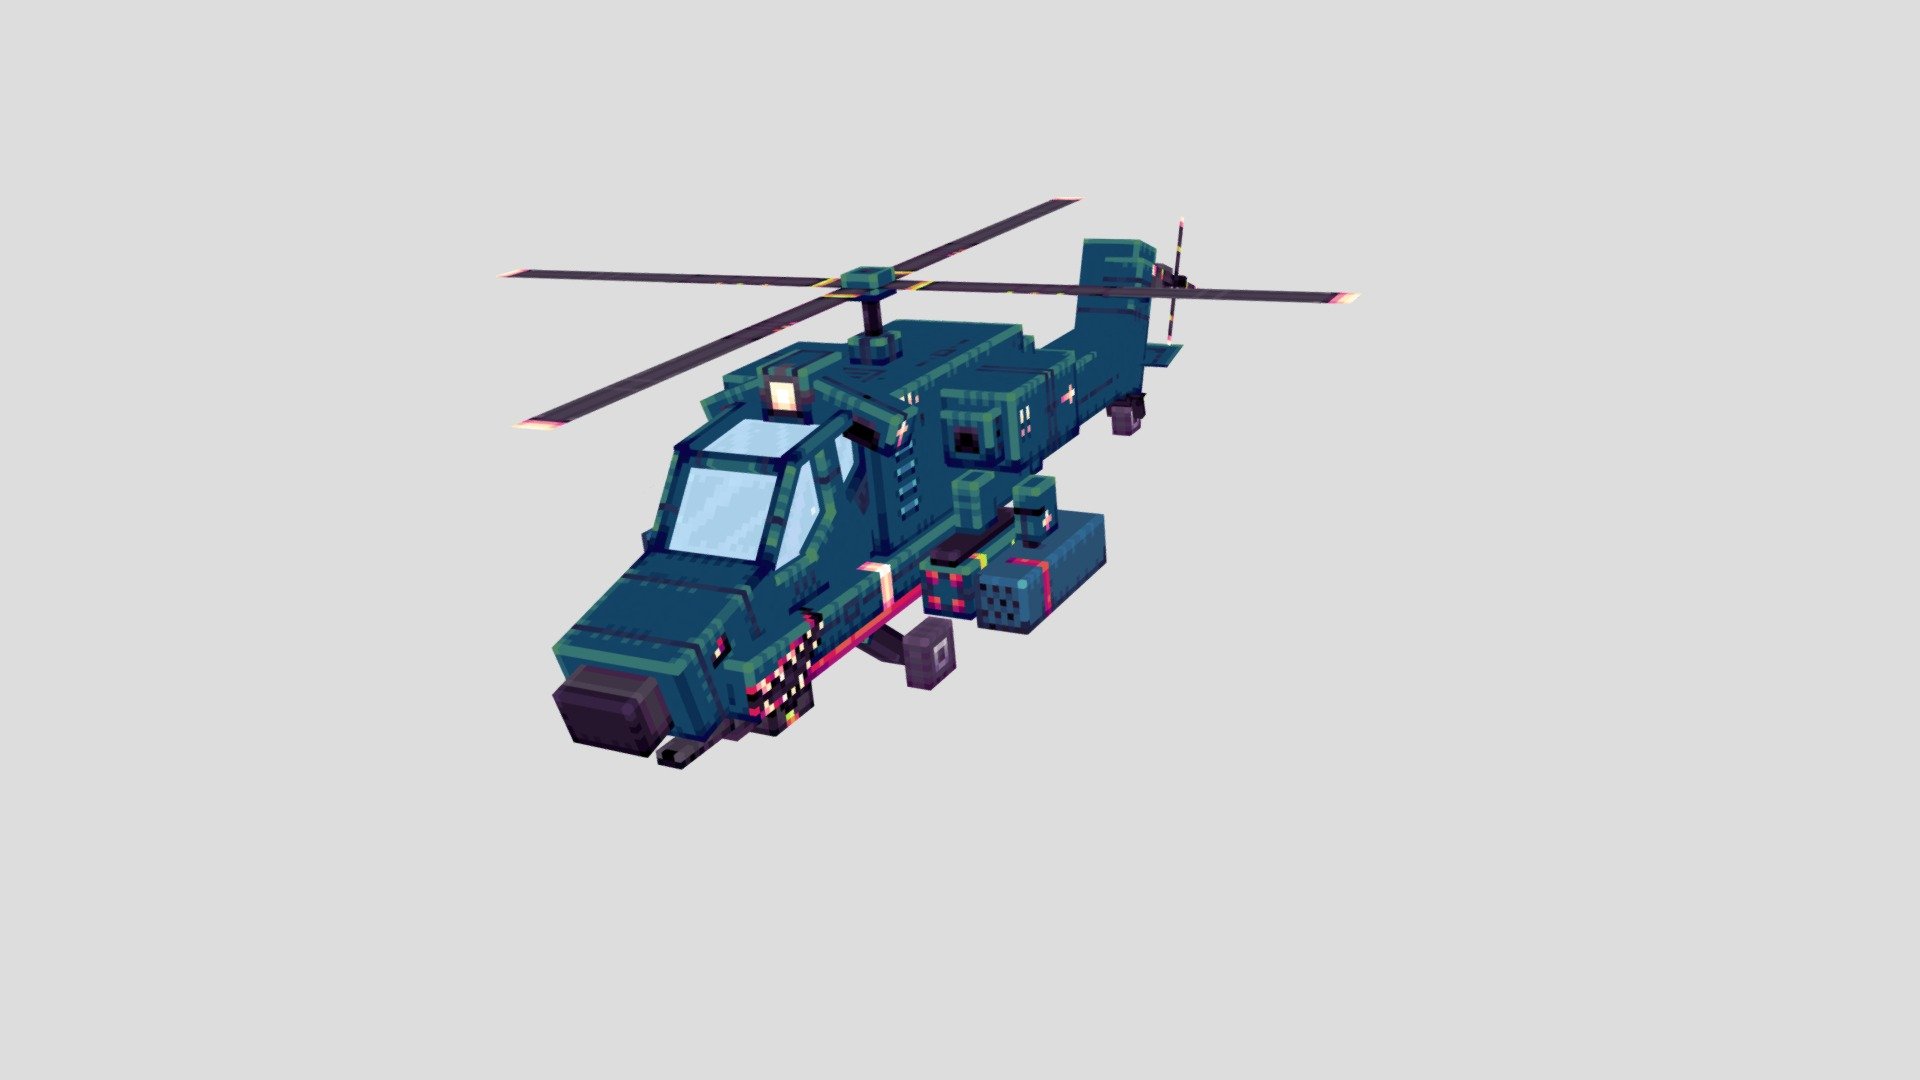 Helicopter Apachie